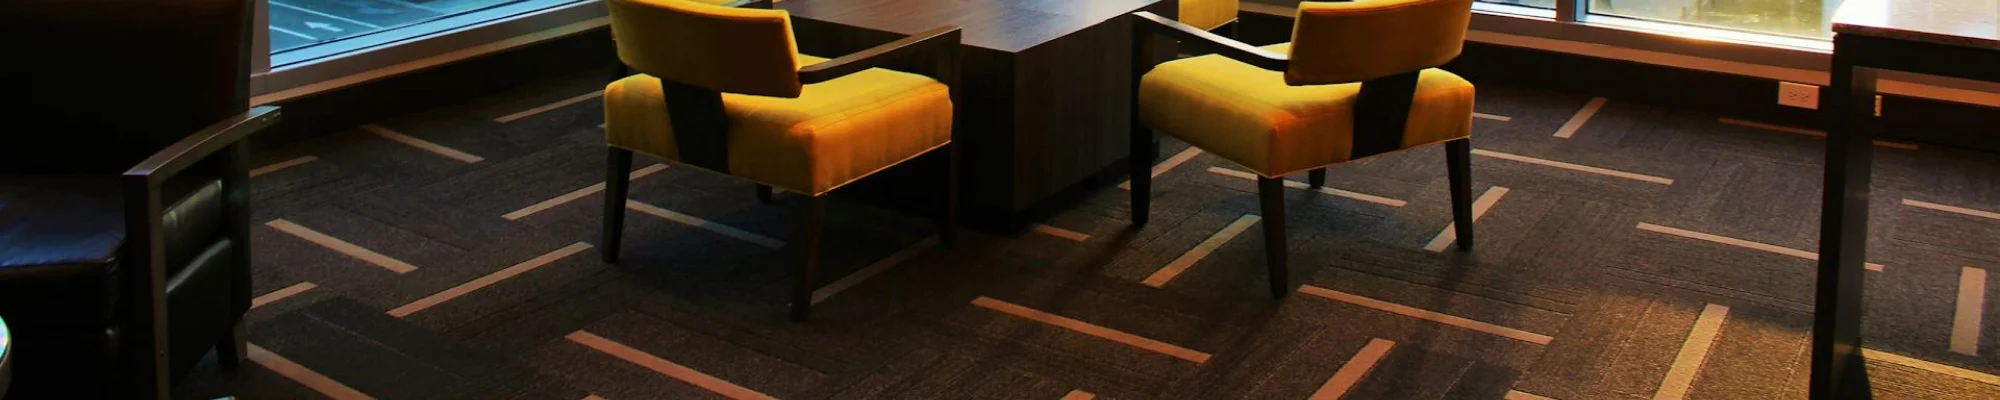 Commercial flooring and installations options in Metro Detroit